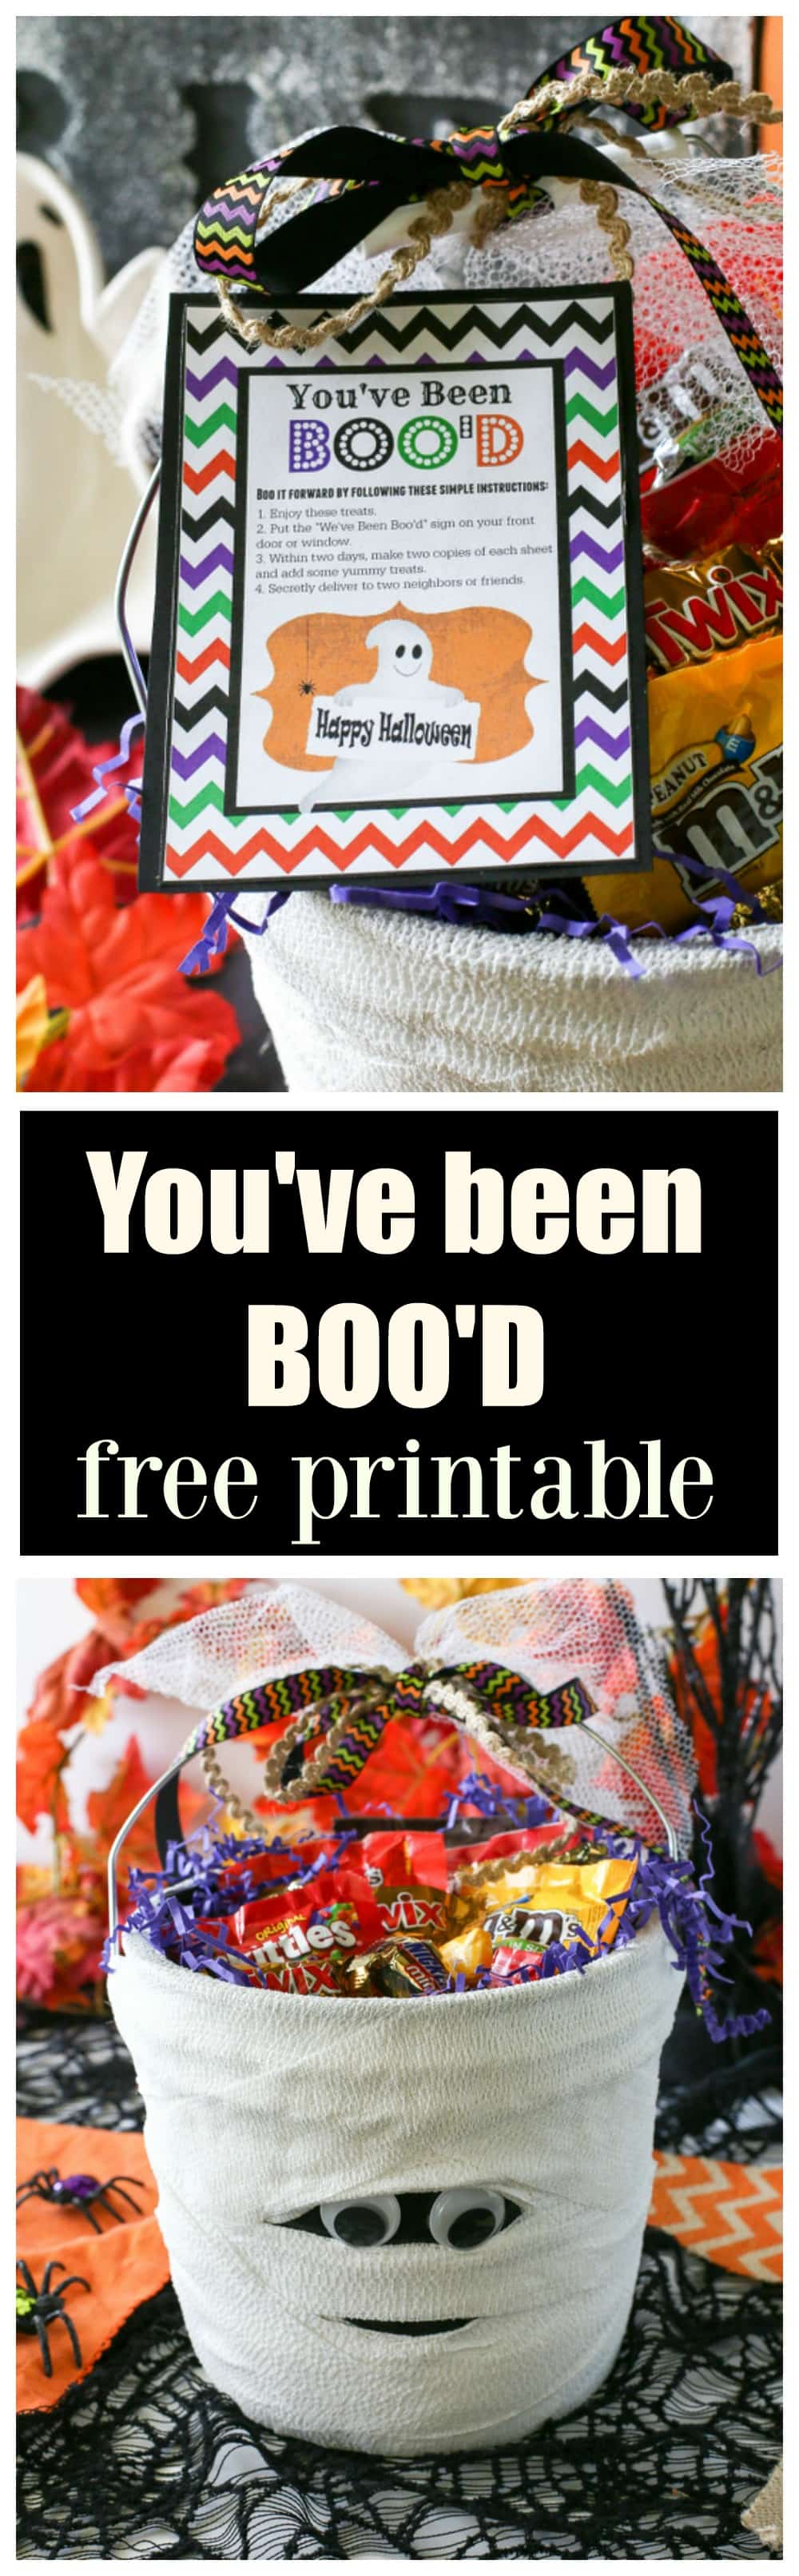 You've Been Boo'ed - A free cute printable to "BOO" your neighbors with! the-girl-who-ate-everything.com